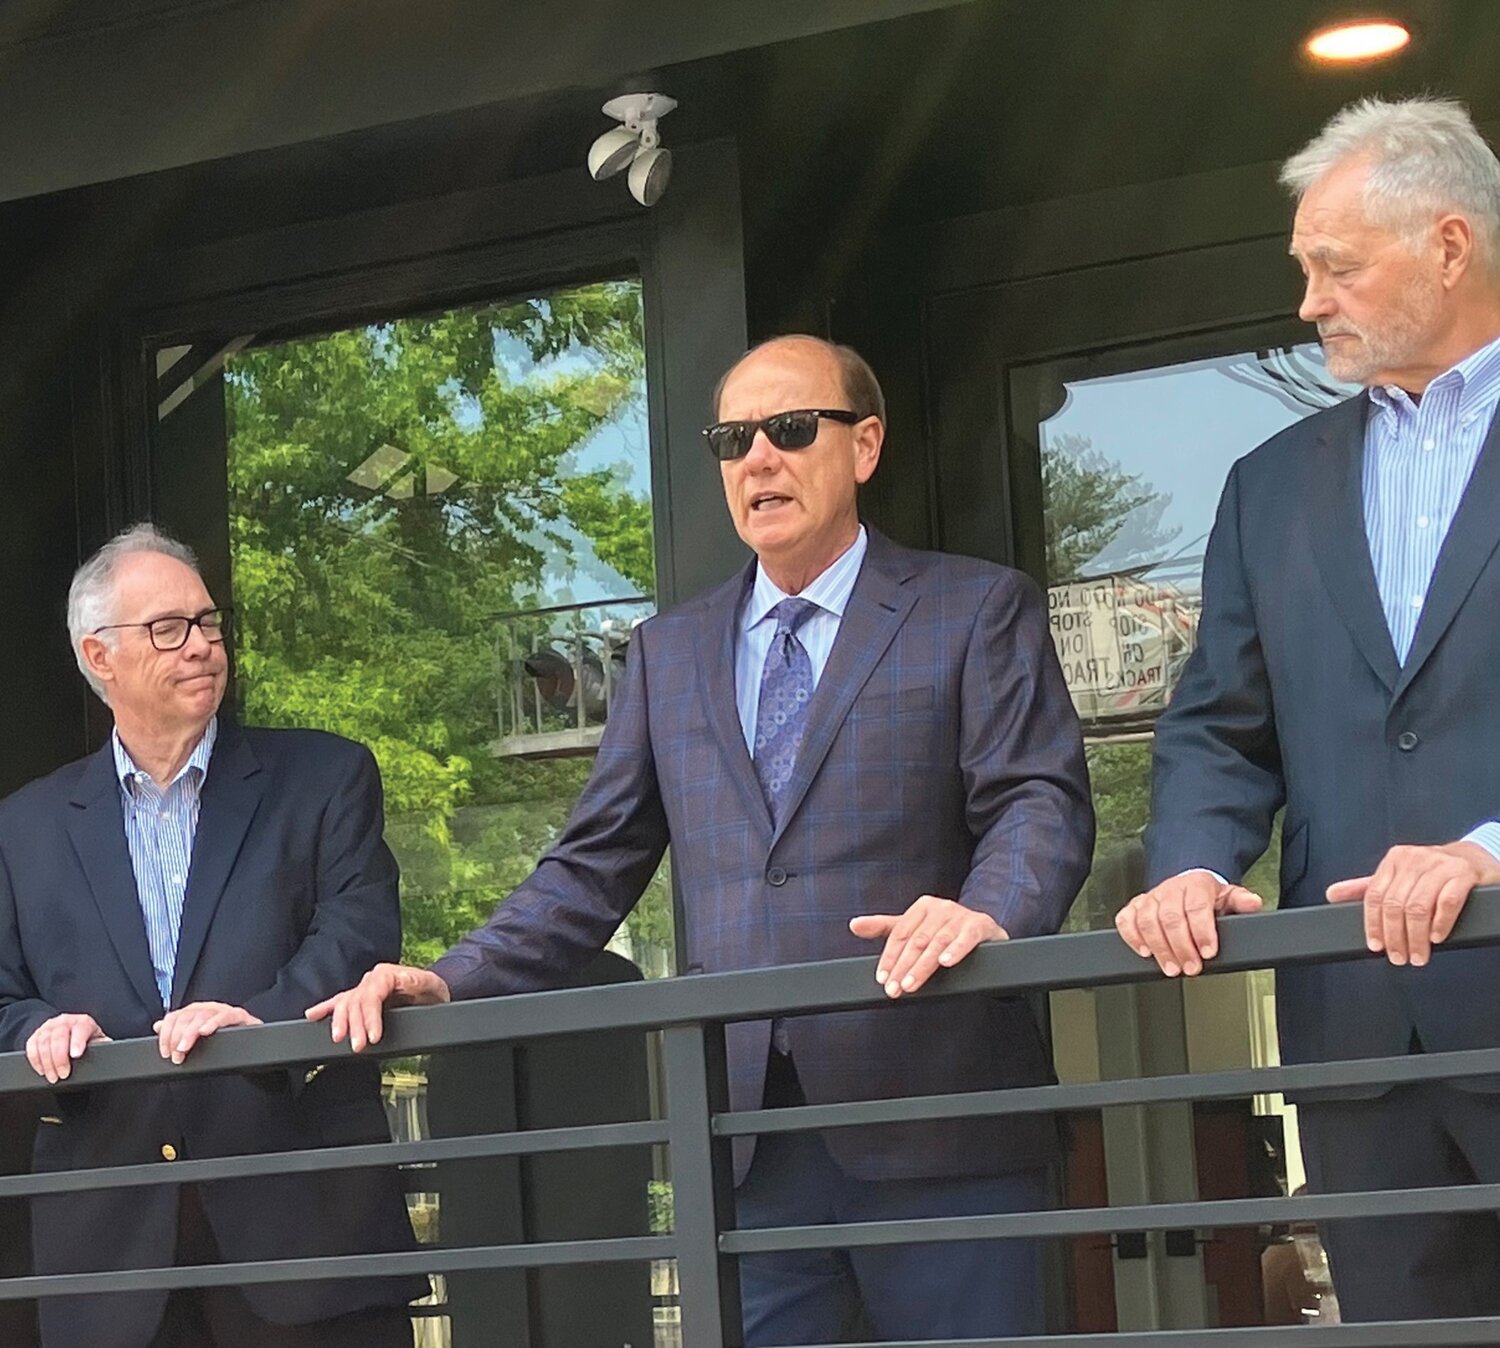 Flanked by Architect Ralph Fey, left, and lead donor Stephen H. Can, right, New Hope Mayor Laurence Keller discusses the reopening of the New Hope Arts Center on Stockton Avenue.